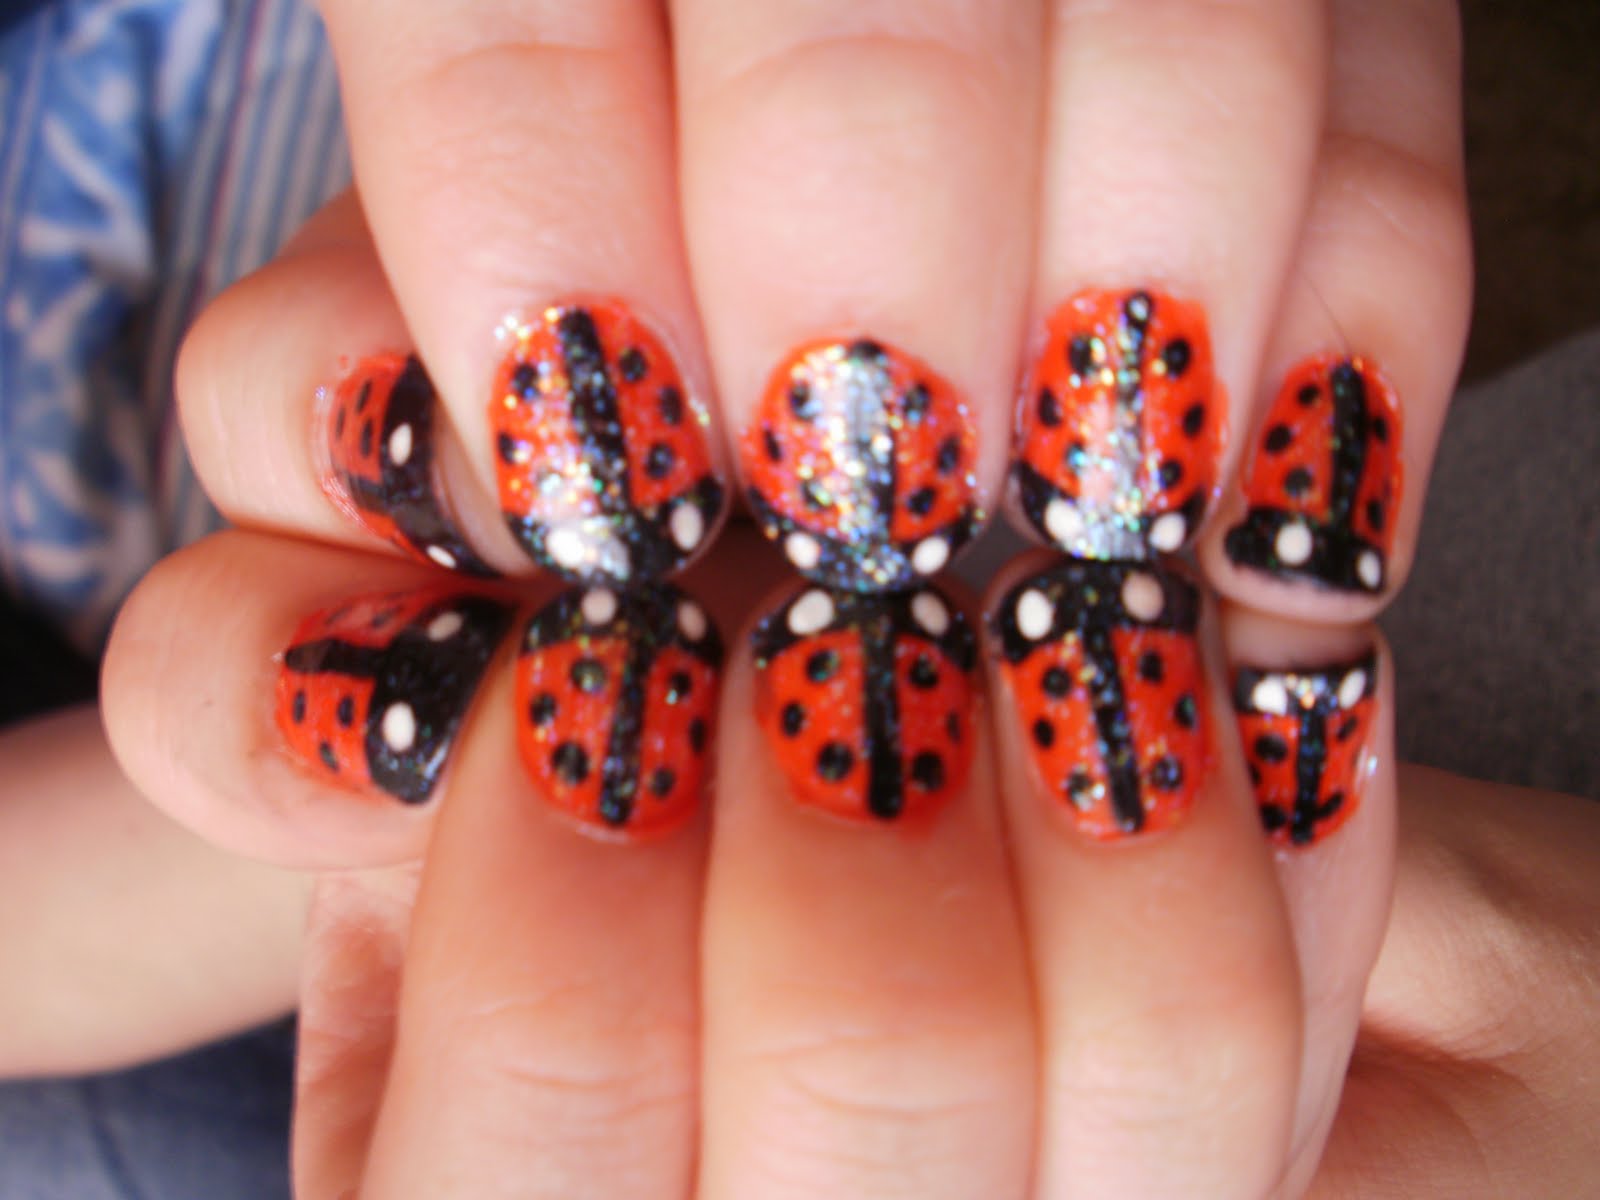 nail art ladybug with movable wings